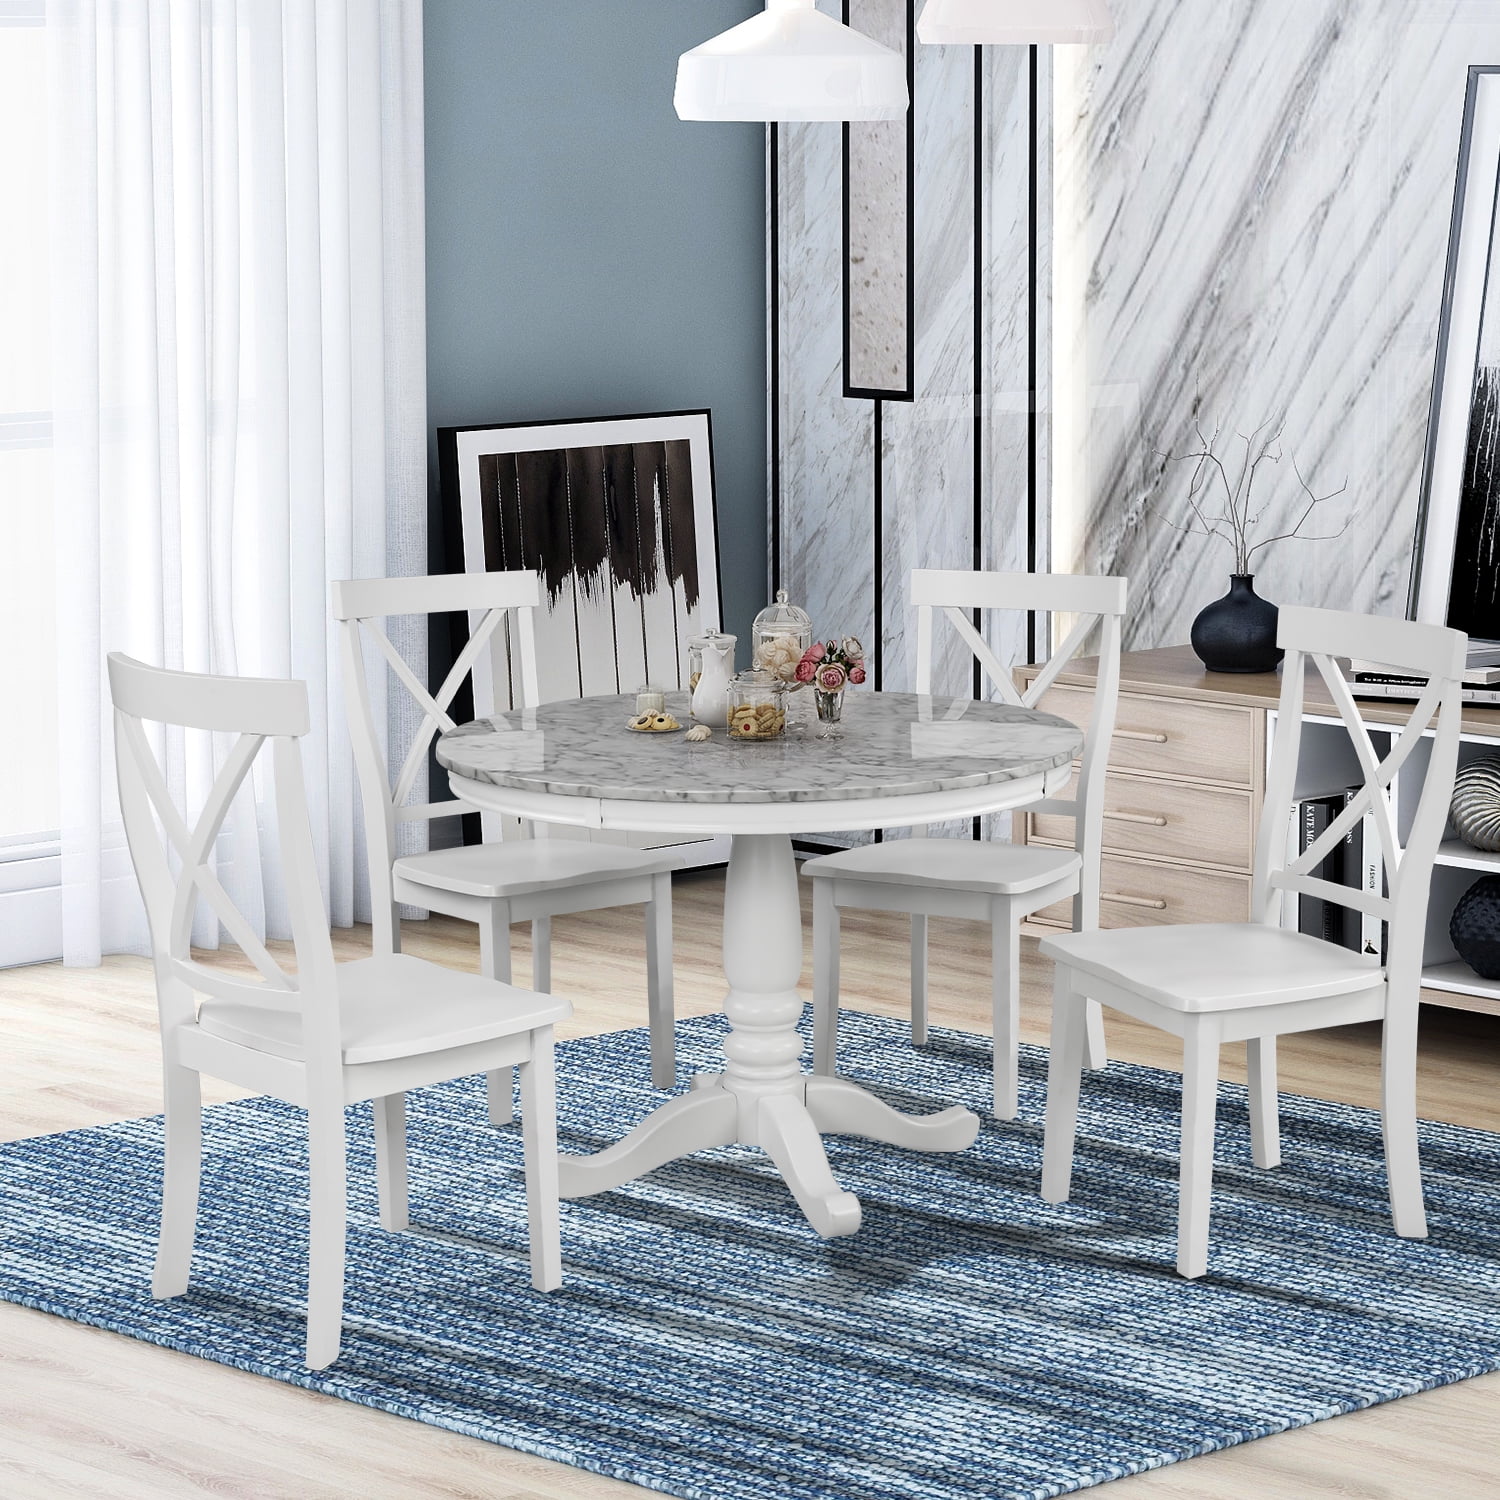 Round Dining Table And Chair Set, White And Grey Round Dining Table Set